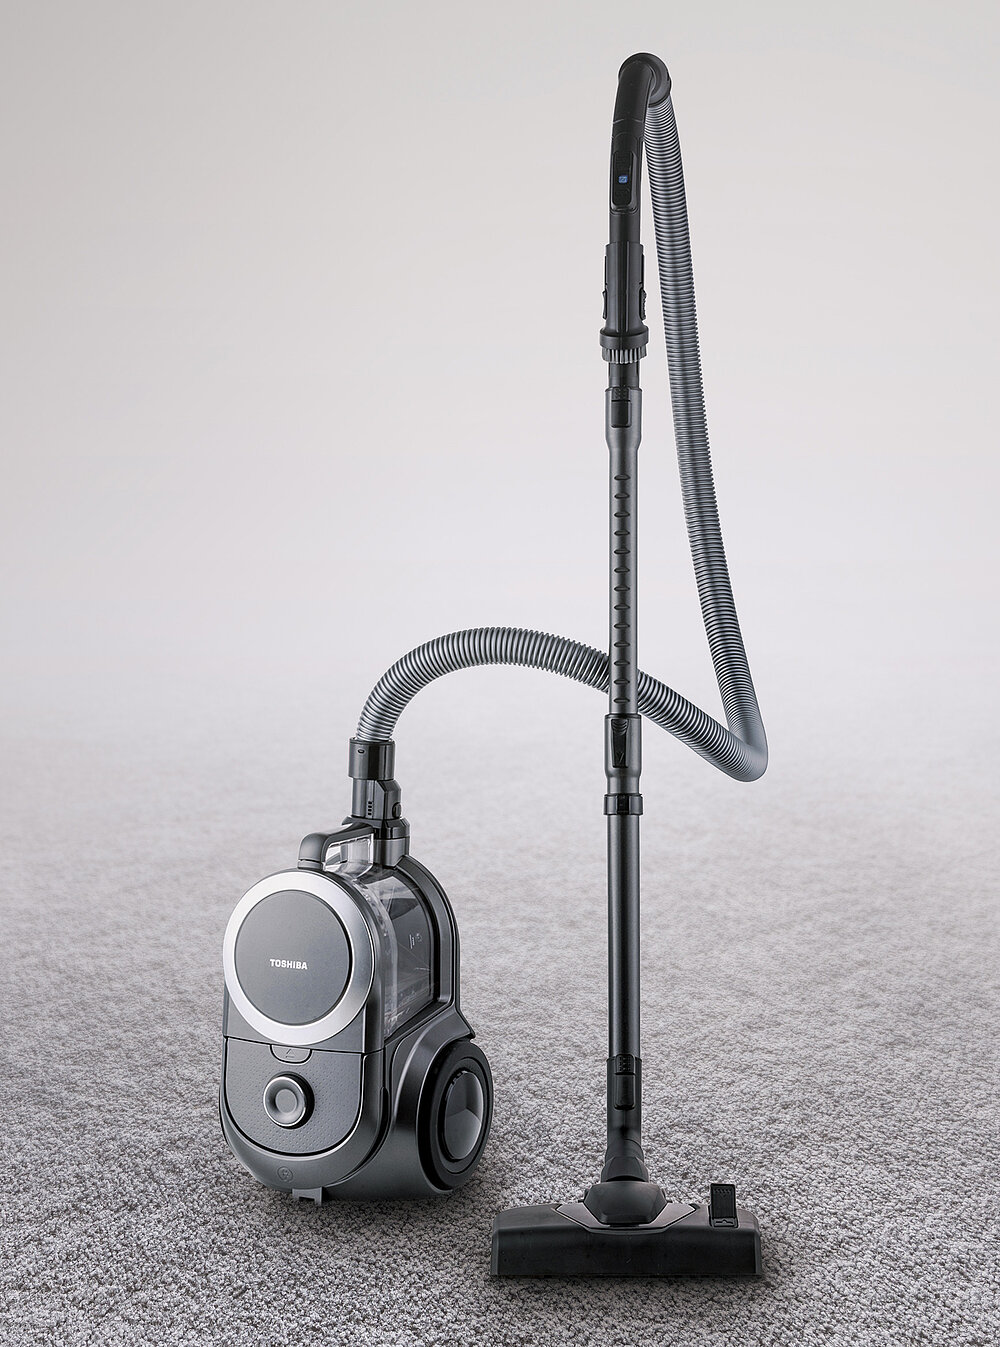 Red Dot Design Award: TOSHIBA Canister Vacuum Cleaner 18C